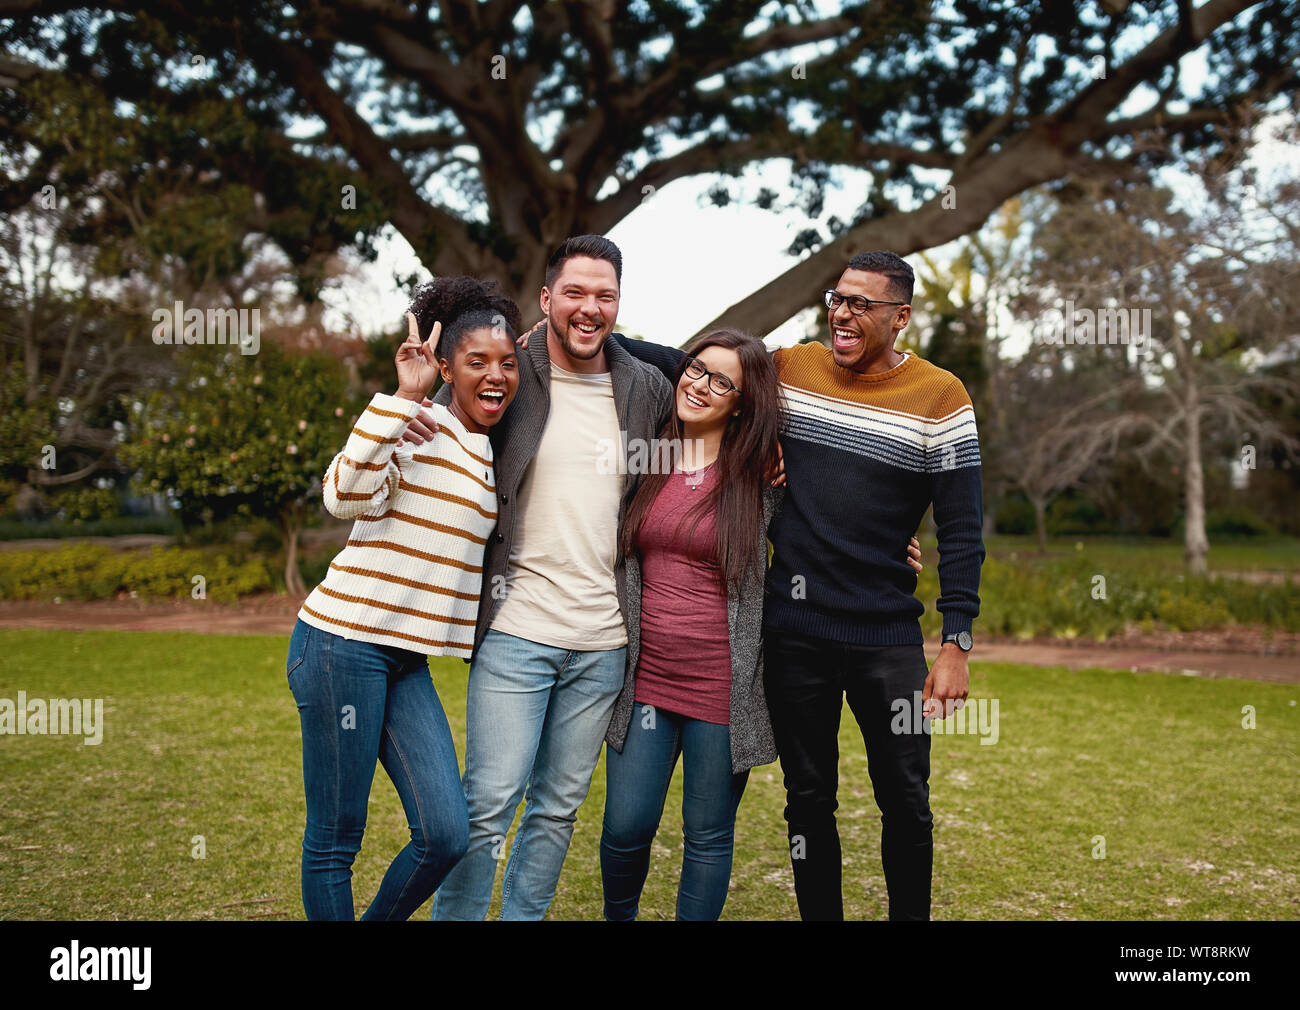 Multiracial group of friends enjoying and standing together in the park looking at camera smiling - very colorful clothing Stock Photo